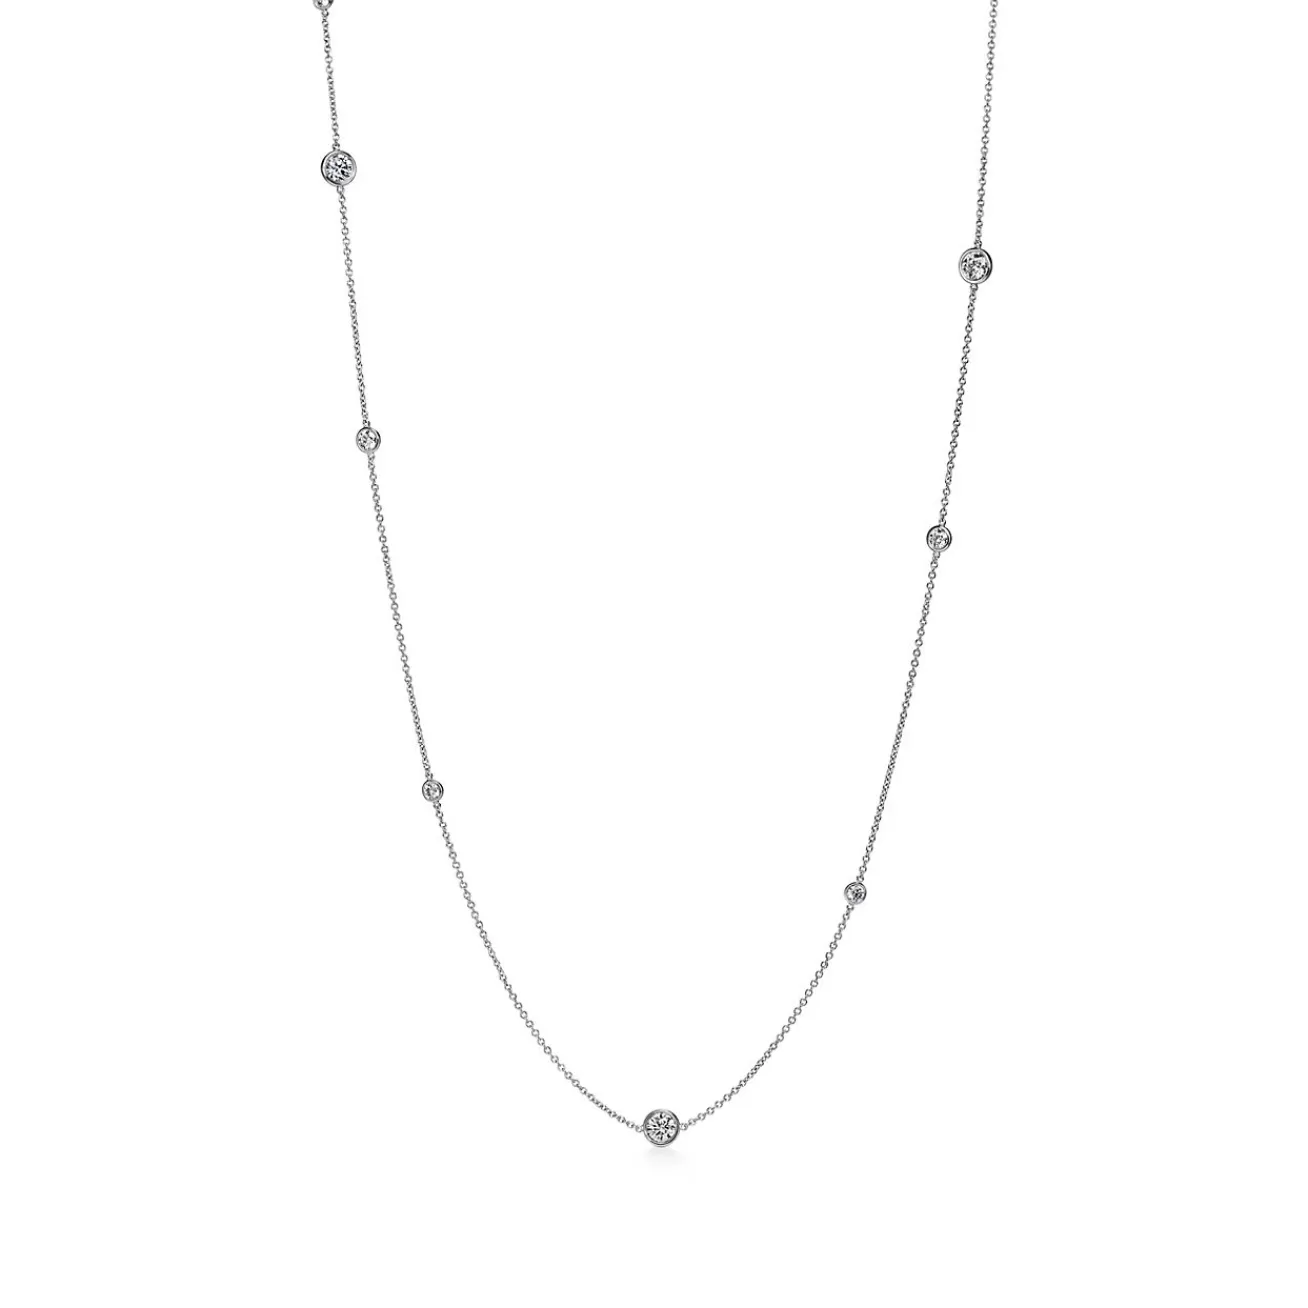 Tiffany & Co. Elsa Peretti® Diamonds by the Yard® Sprinkle Necklace in Platinum with Diamonds | ^ Necklaces & Pendants | Platinum Jewelry